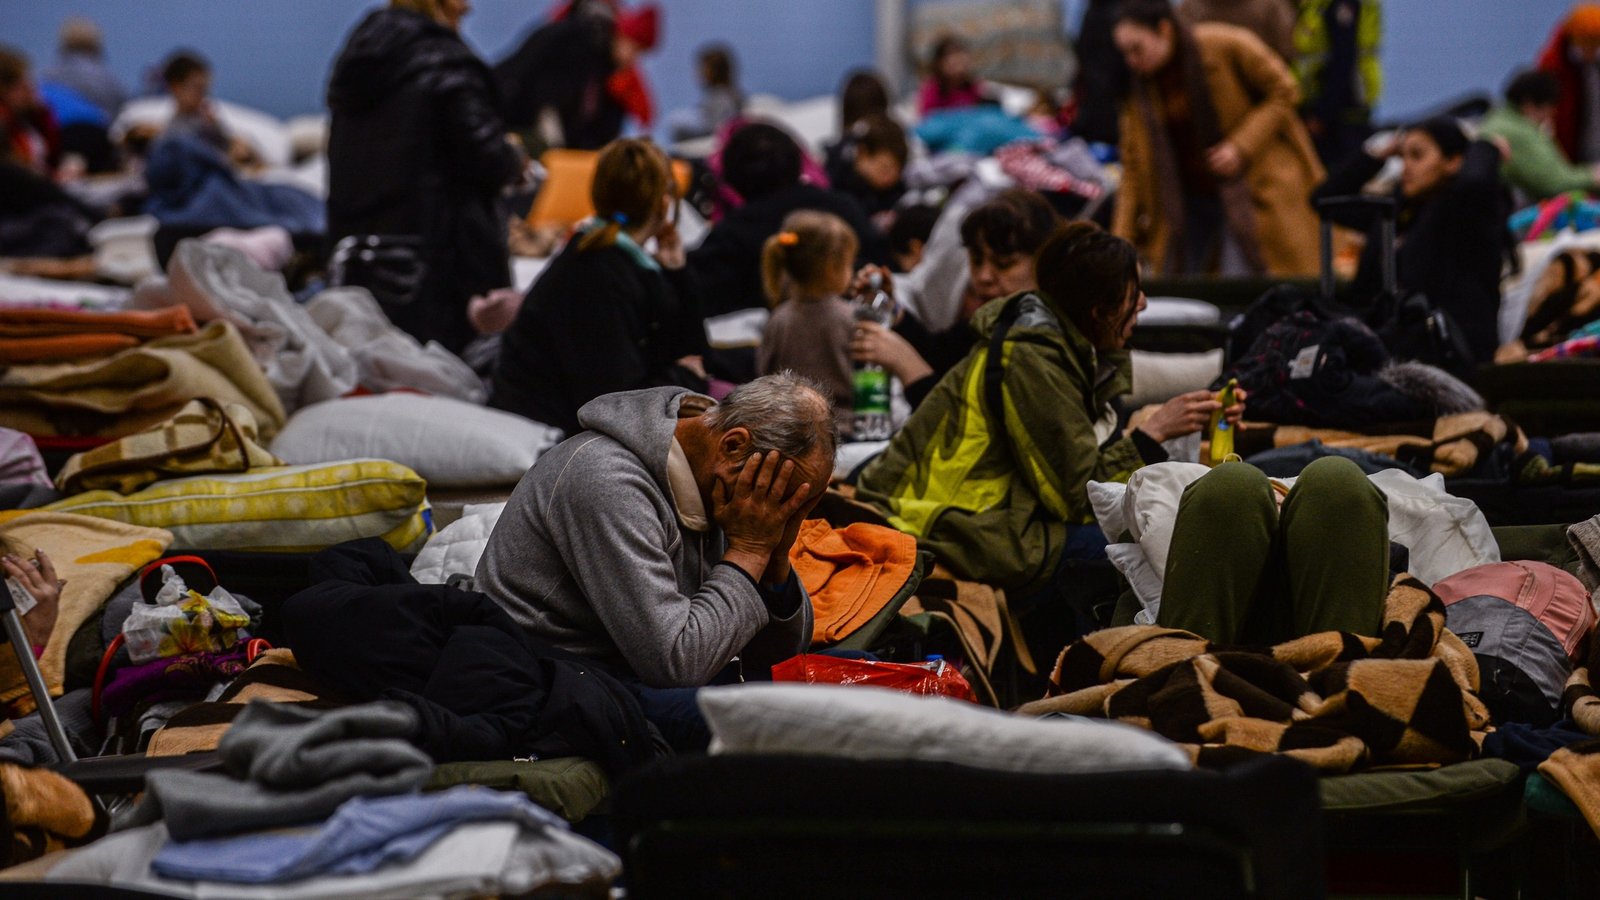 Image - A temporary refugee shelter in an abandoned supermarket houses Ukrainian people in Poland